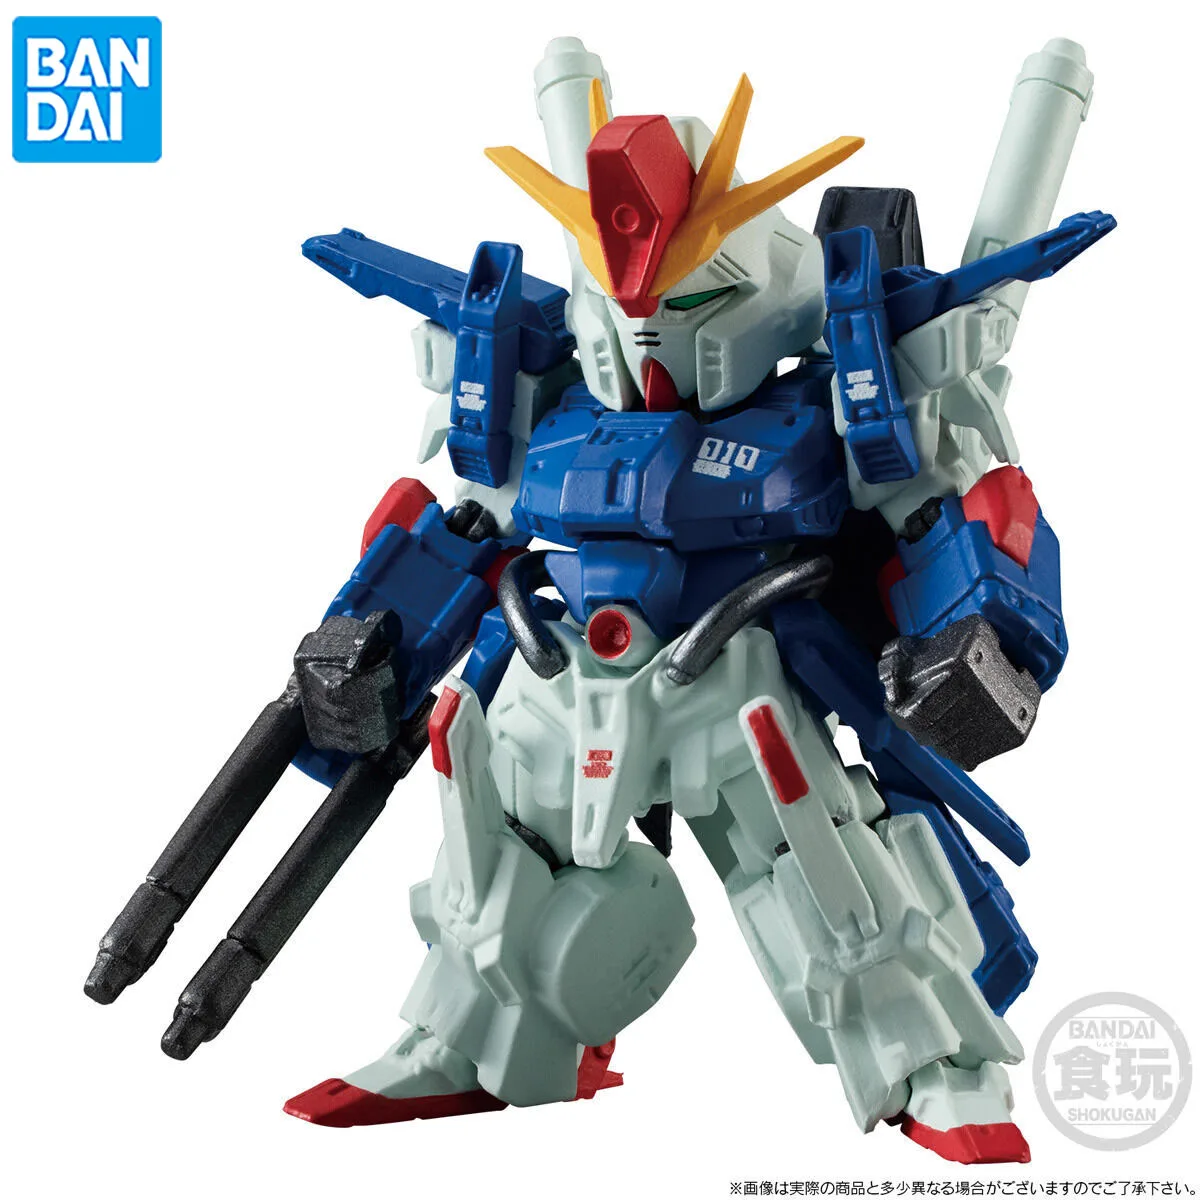 

In Stock Bandai FW Gundam Converge Full Armor ZZ Original Anime Figure Model Doll Action Figures Collection Toys Christmas Gifts